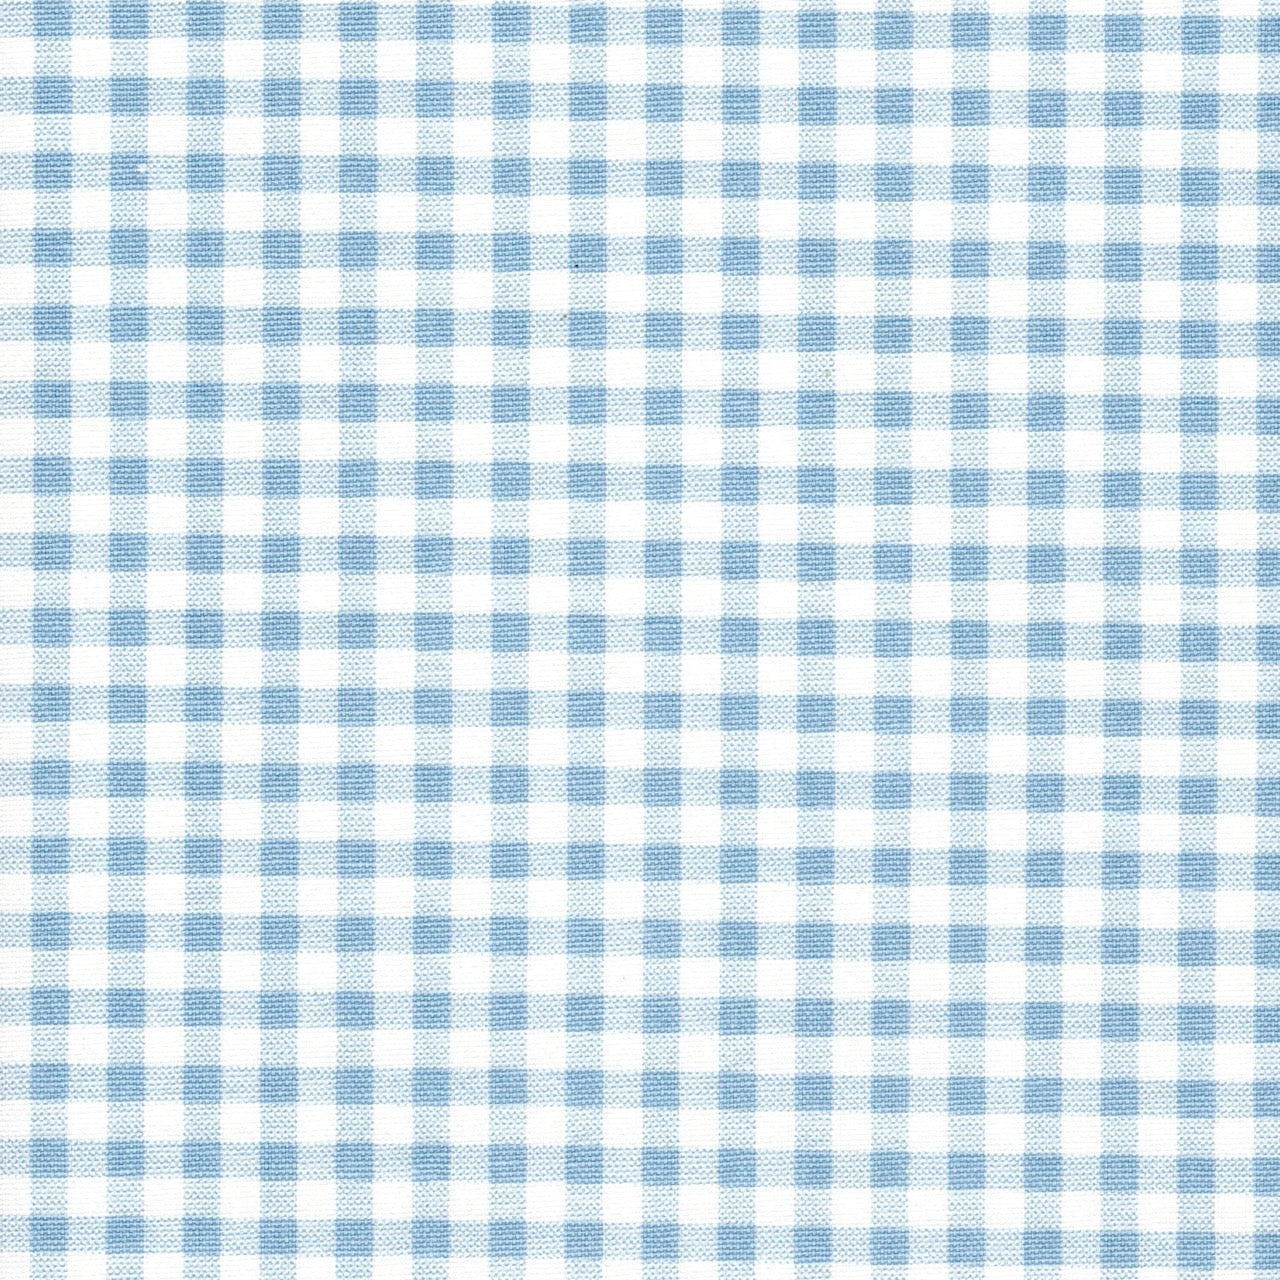 Duvet Cover in Weathered Blue Large Gingham Check on White